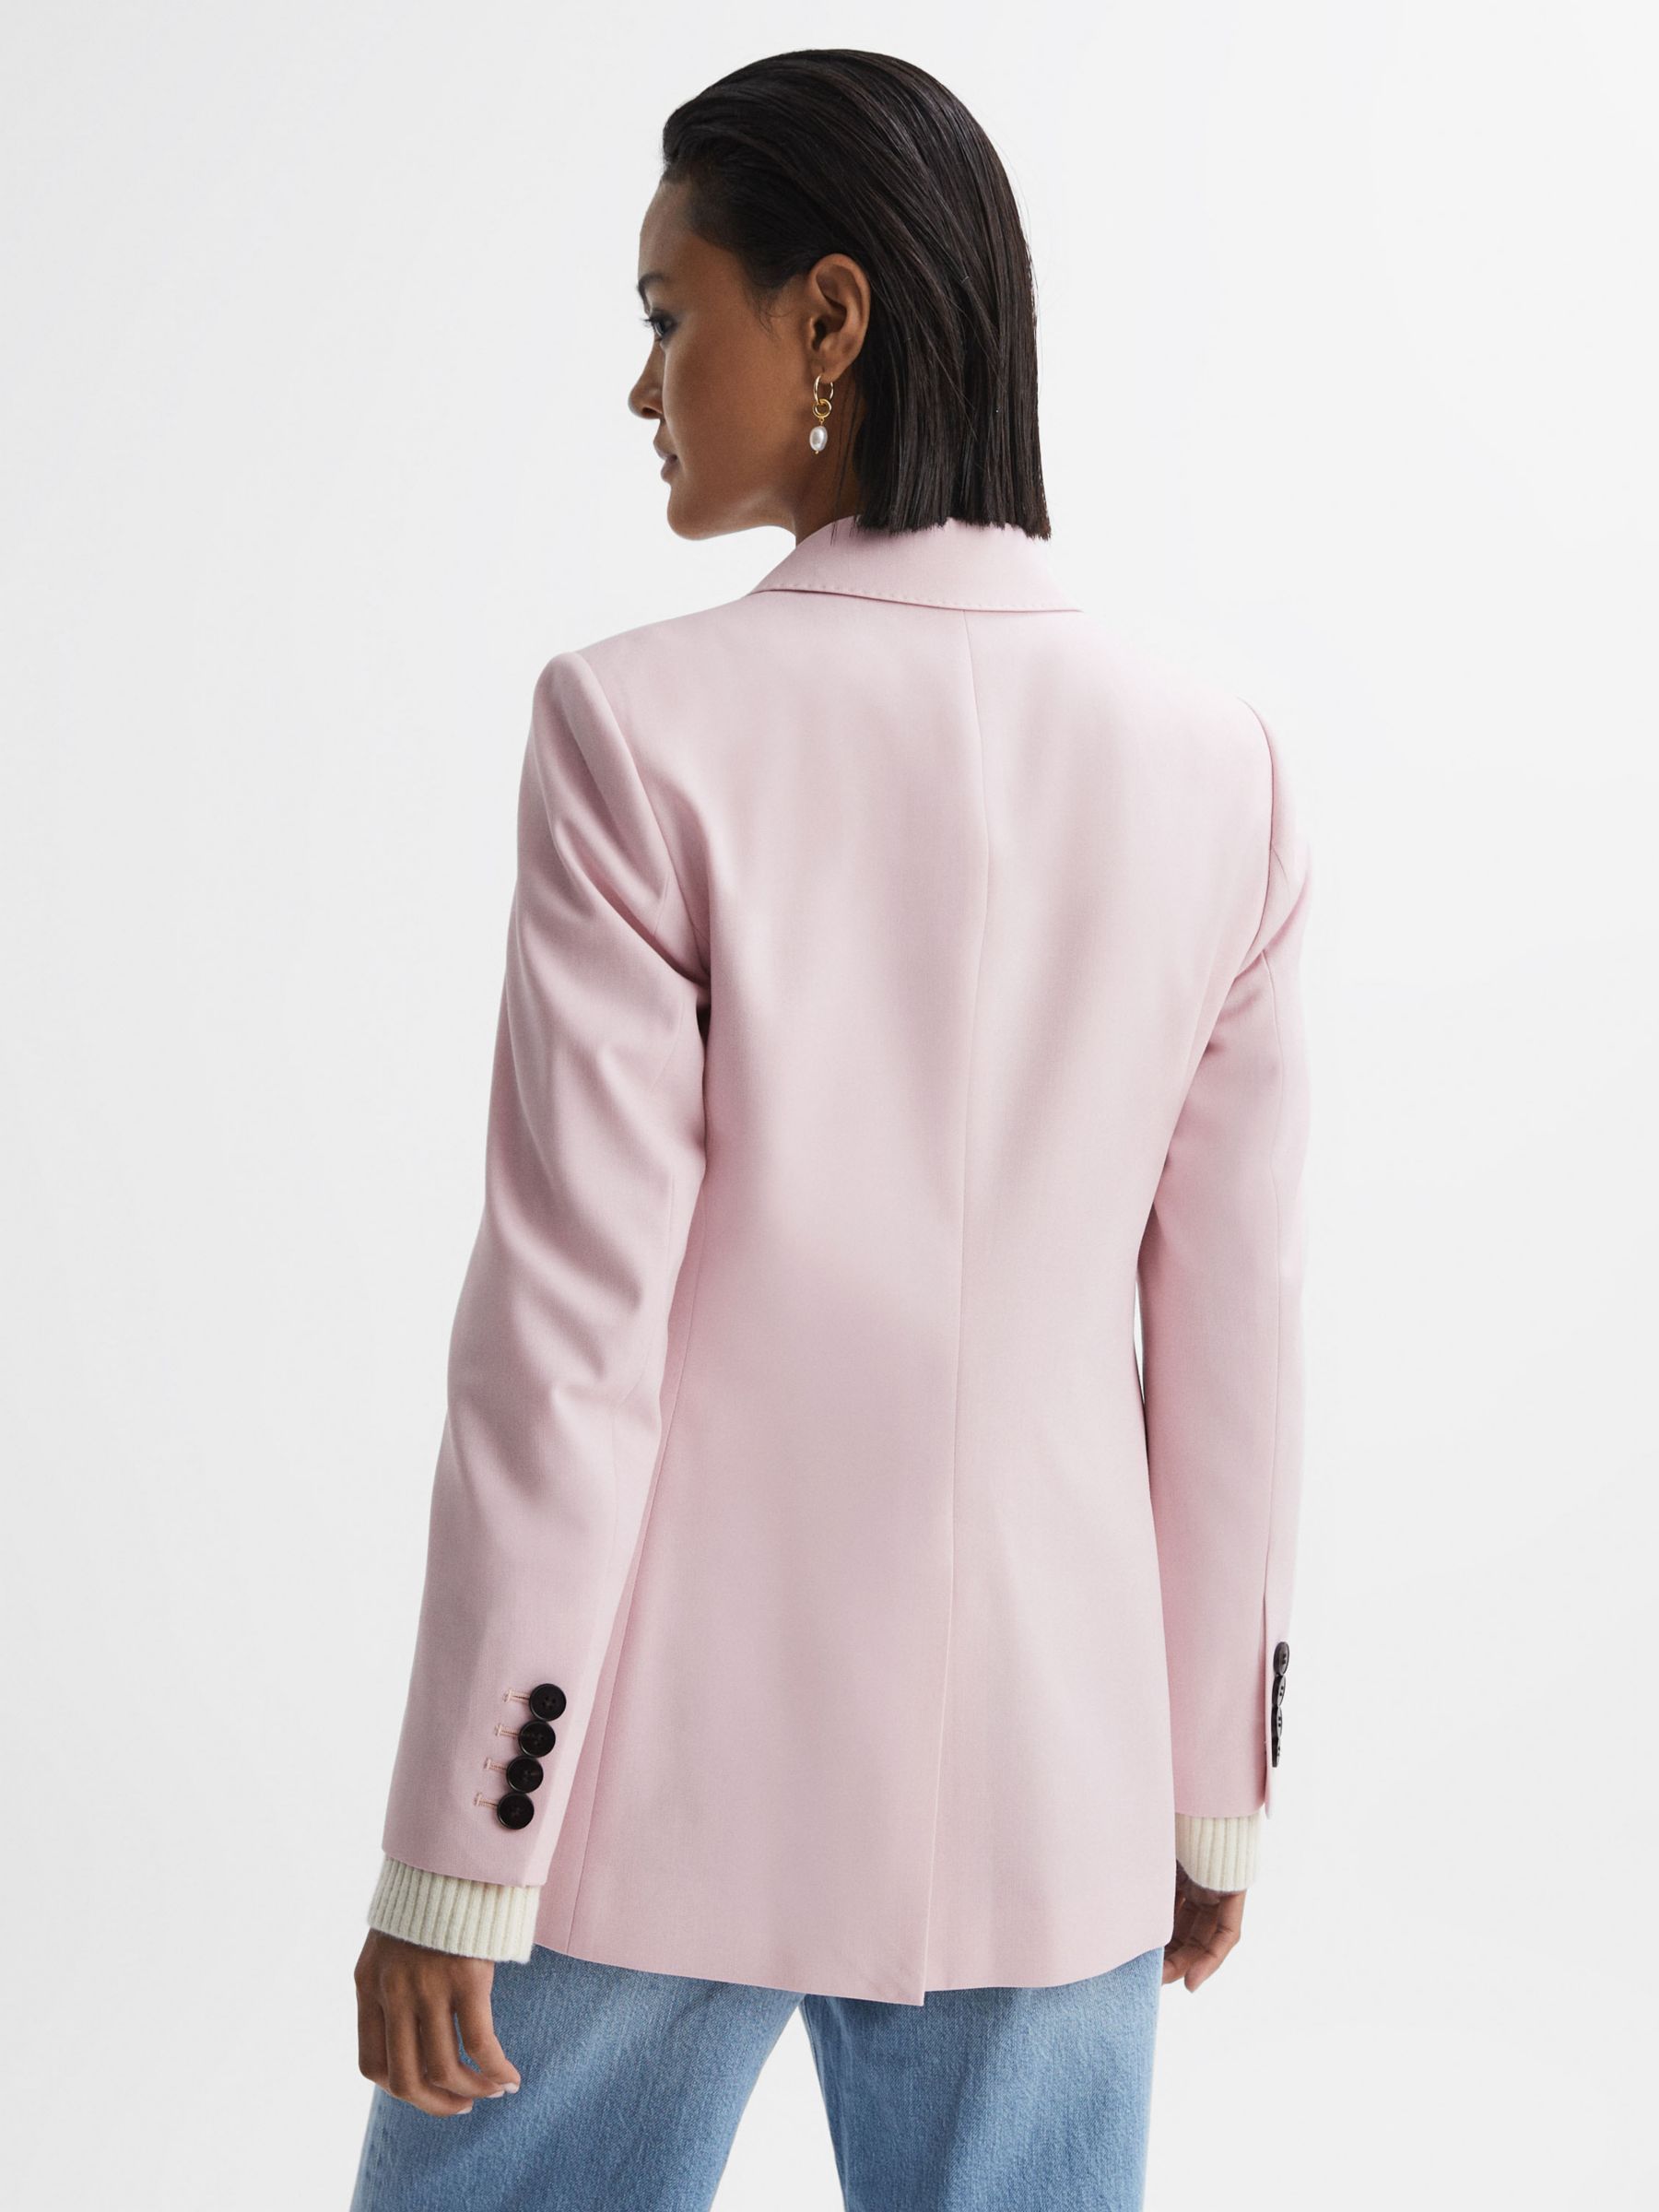 Reiss Evelyn Double Breasted Wool Blend Blazer, Pink, 14